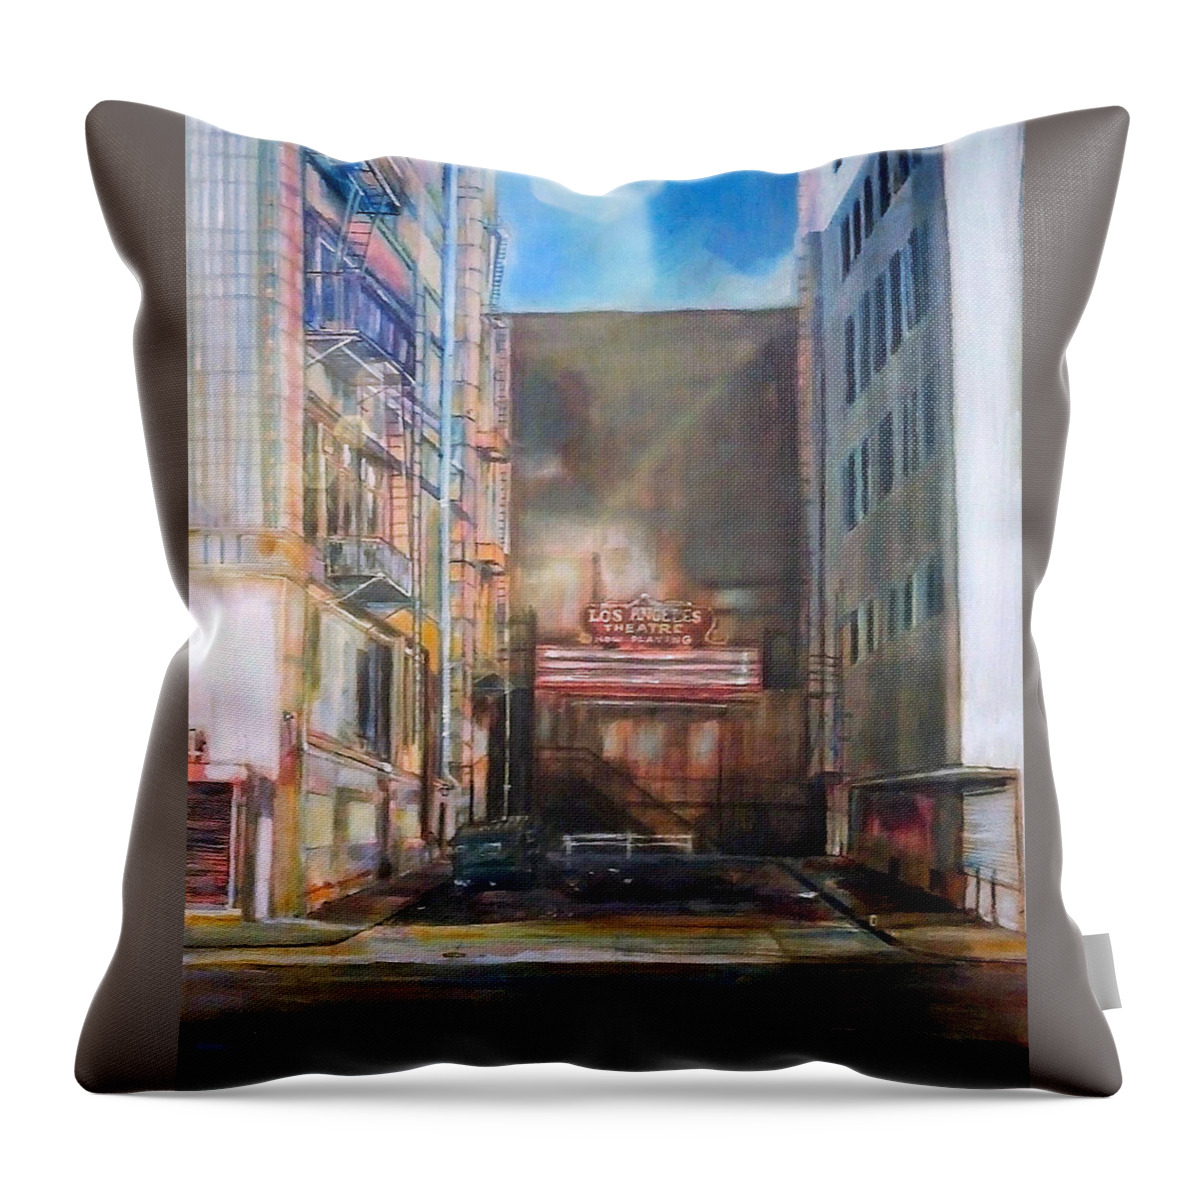  Throw Pillow featuring the painting Los Angeles by Try Cheatham